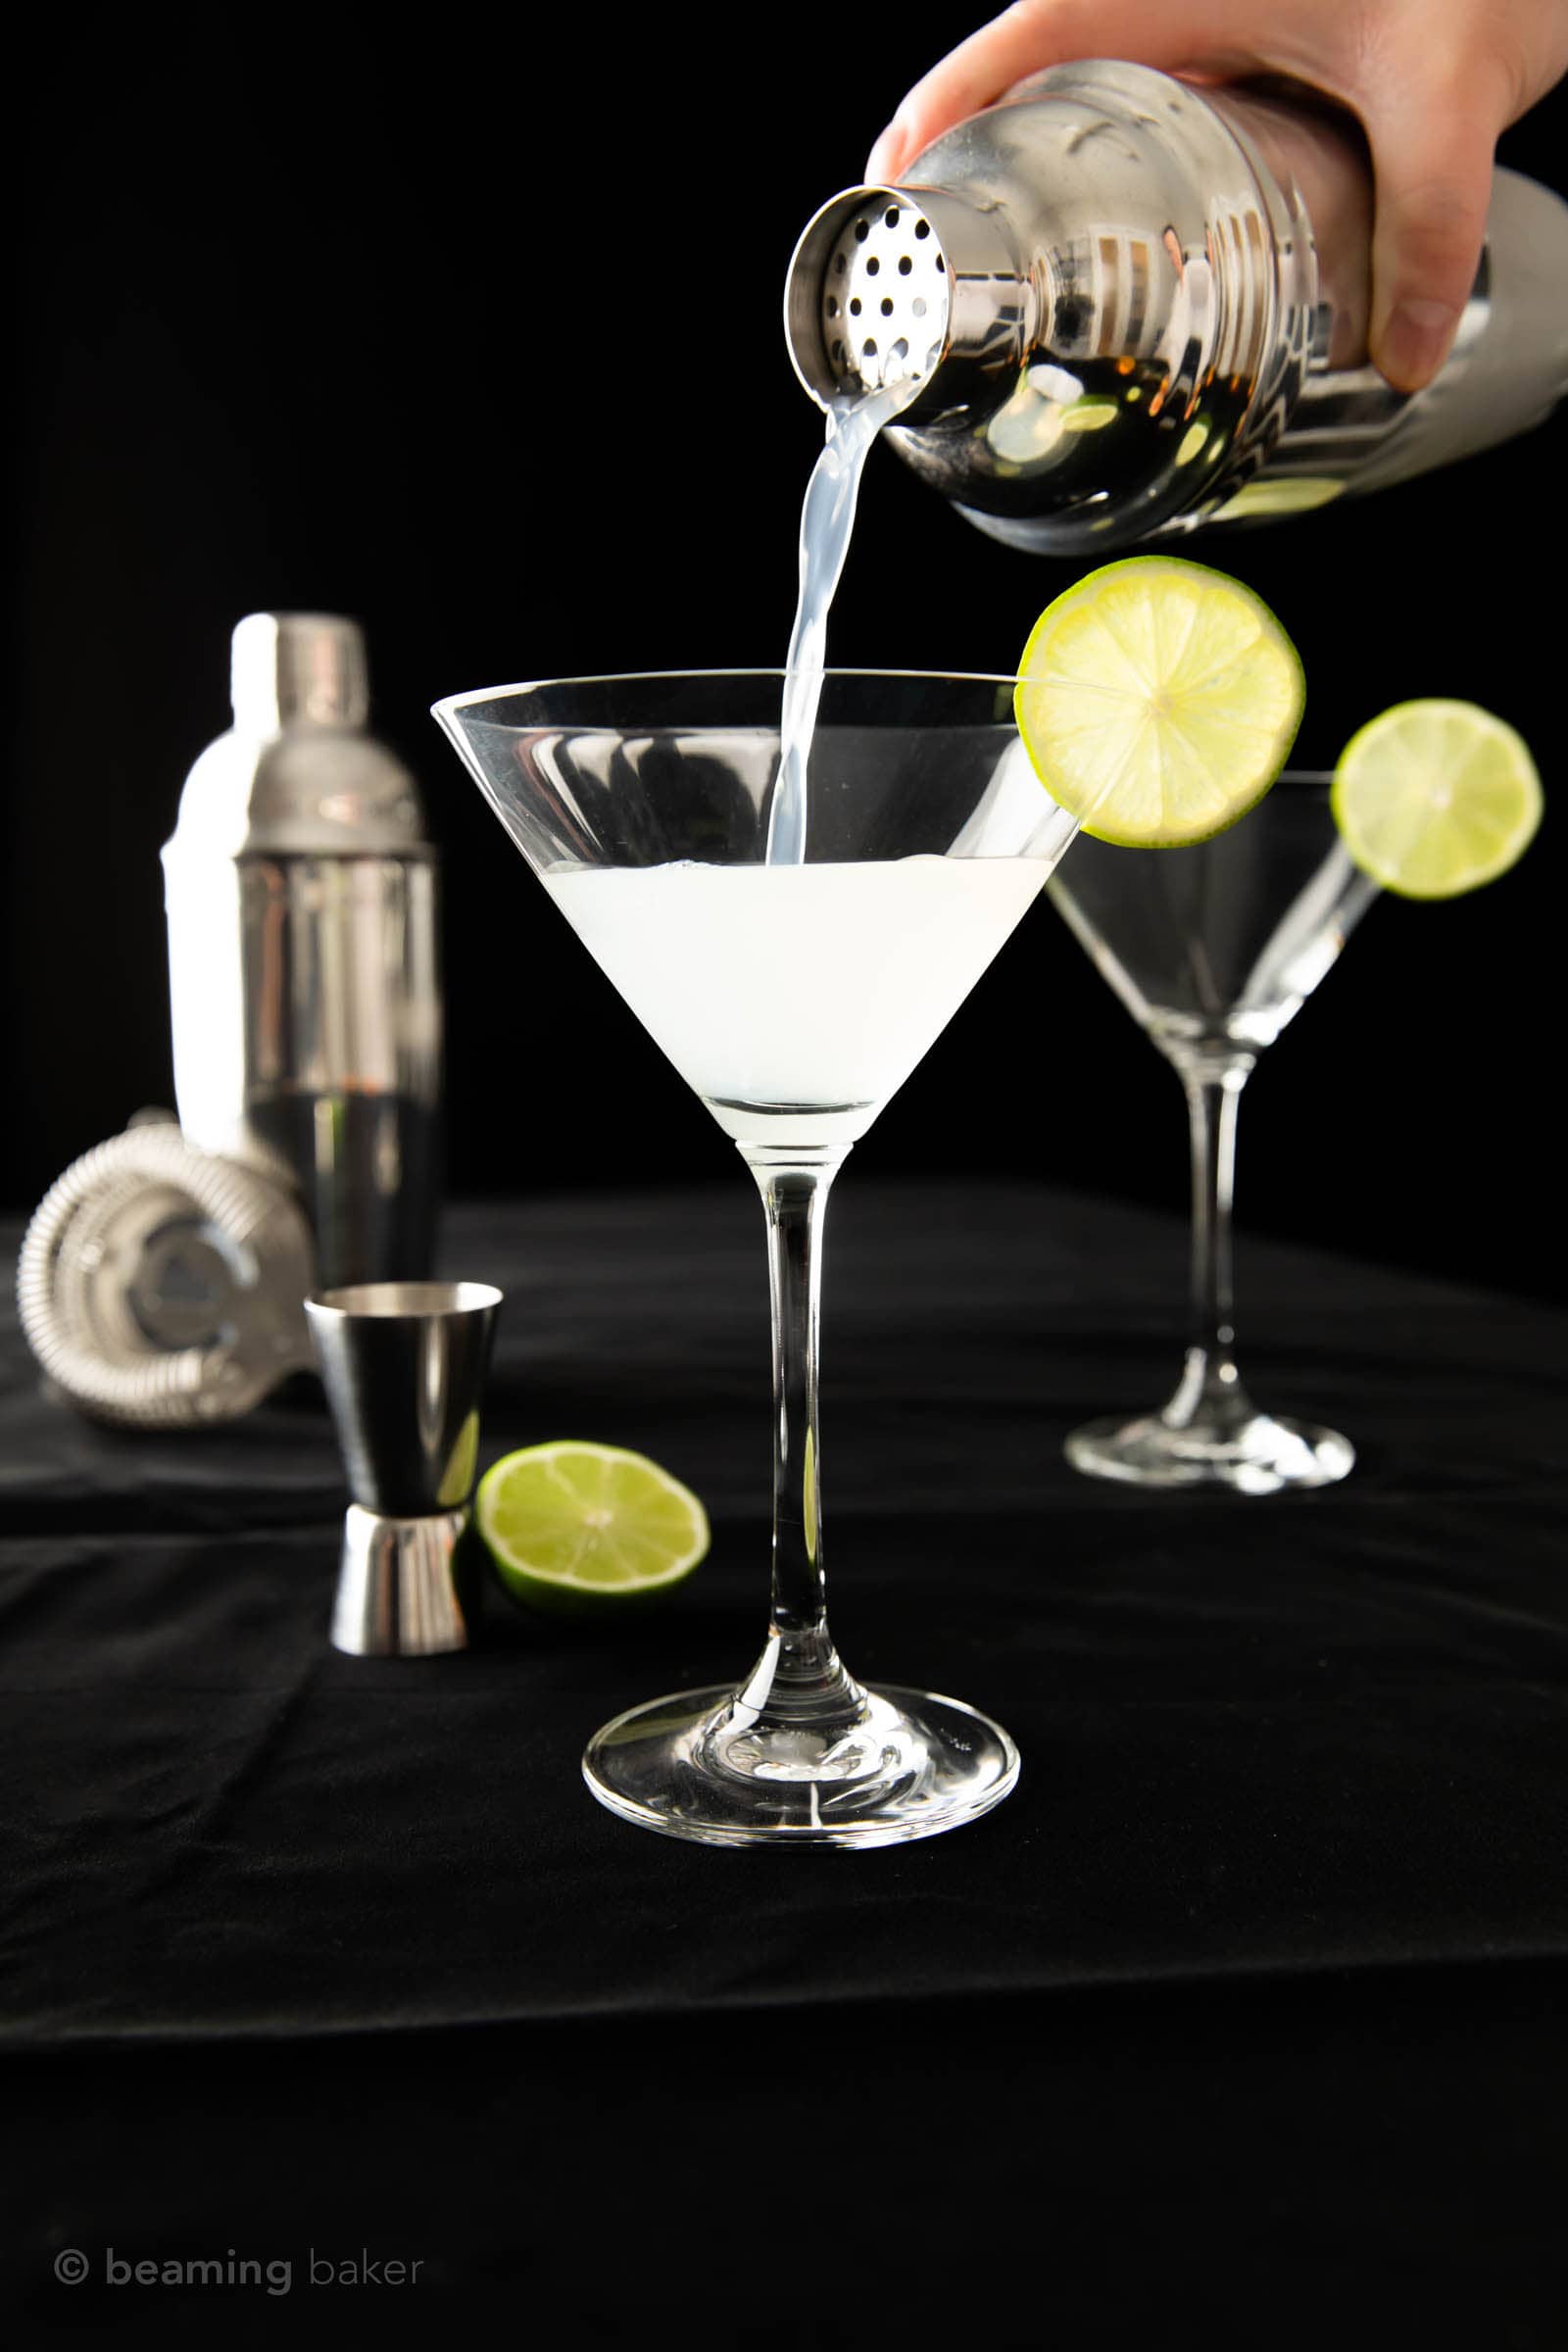 Straining gin gimlet from a stainless steel cocktail shaker into a martini glass